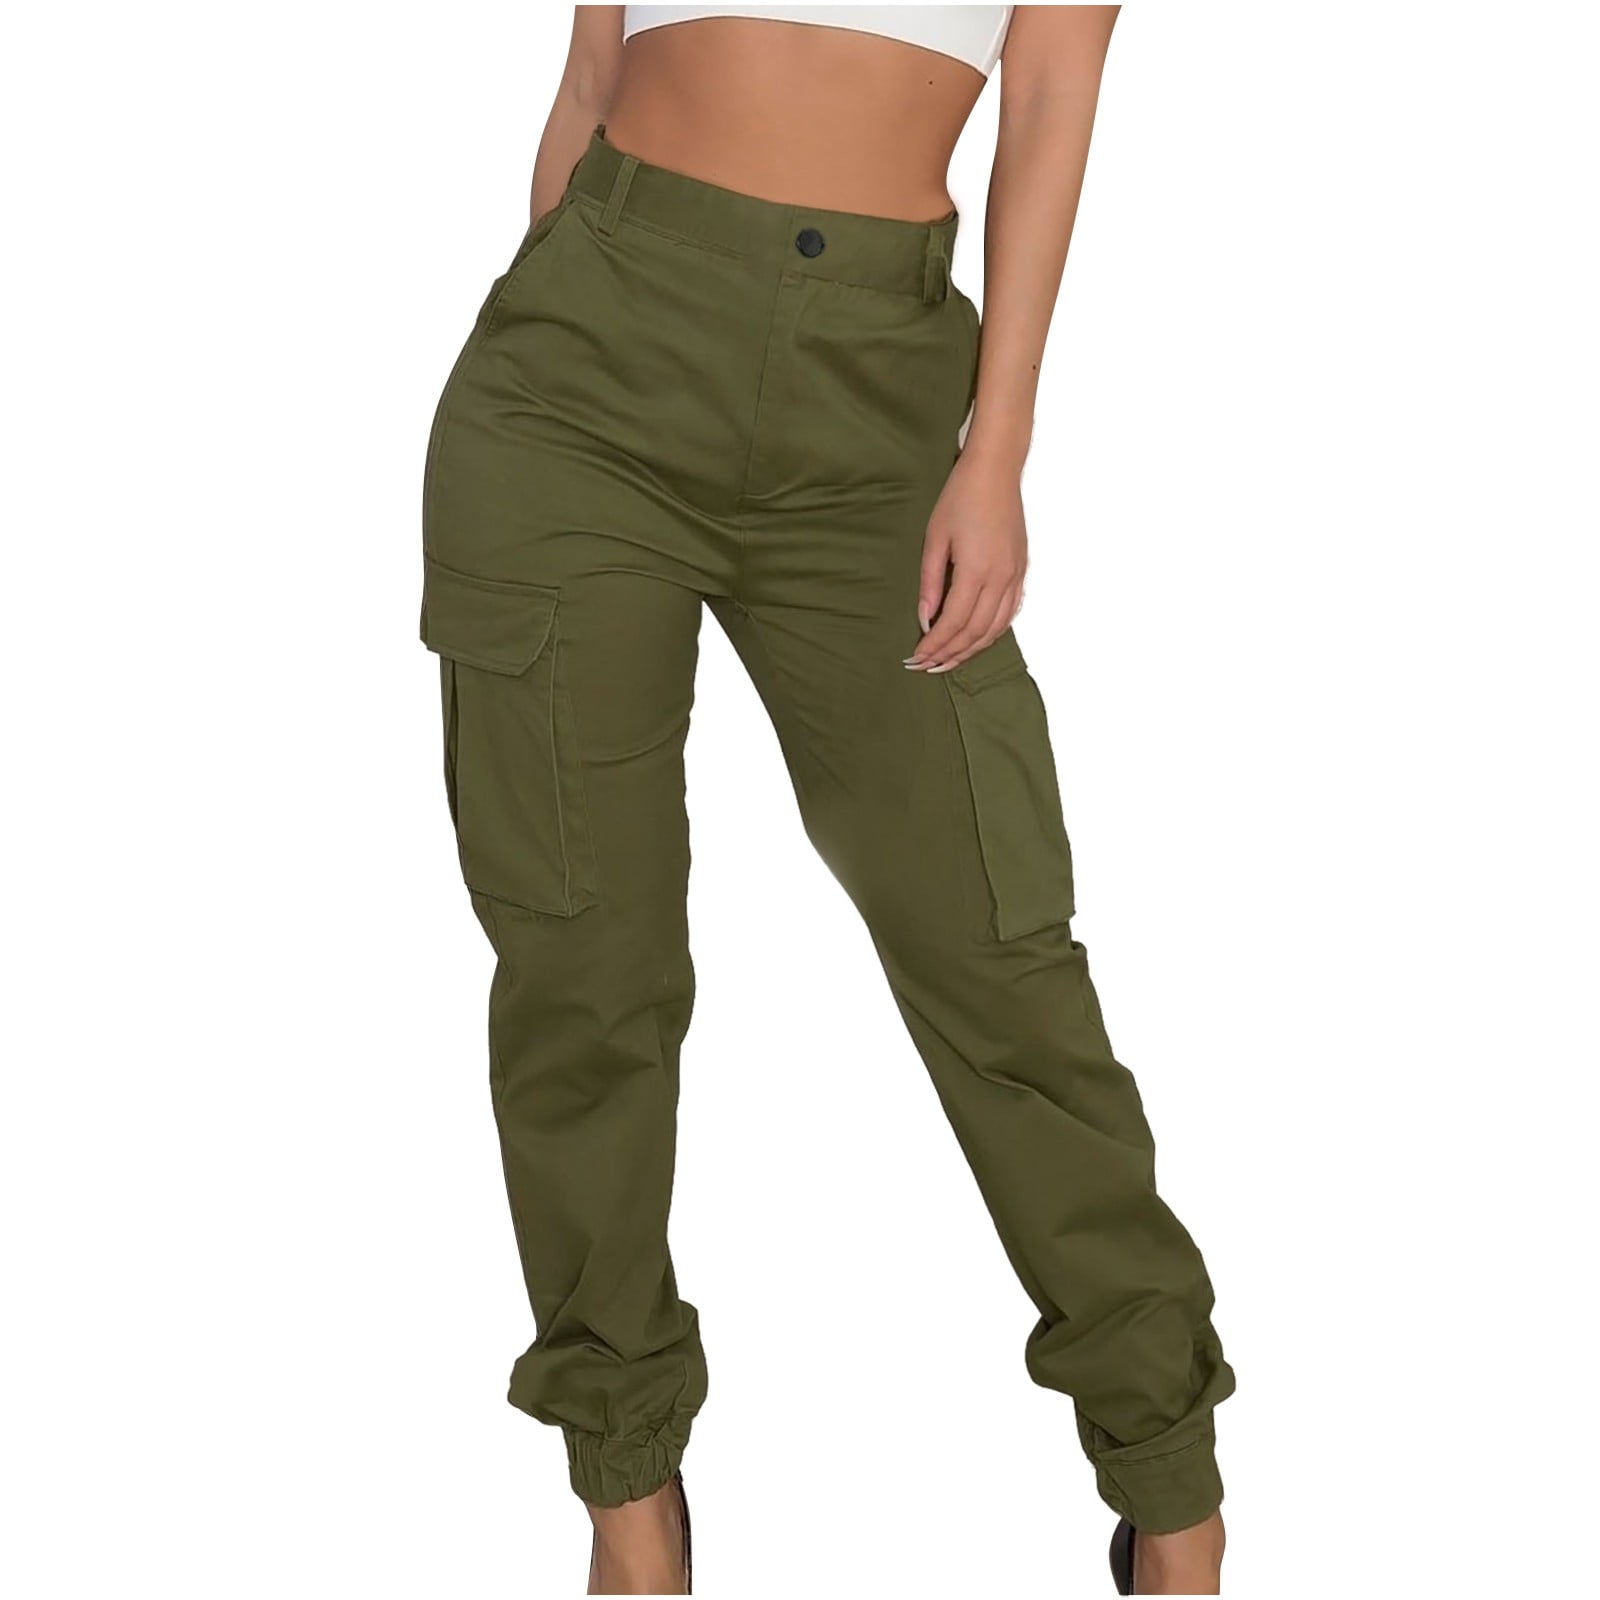 Cargo Pants for Women Lightweight Hiking Pants High Waist Joggers Workout  Pants Casual Outdoor Trousers 